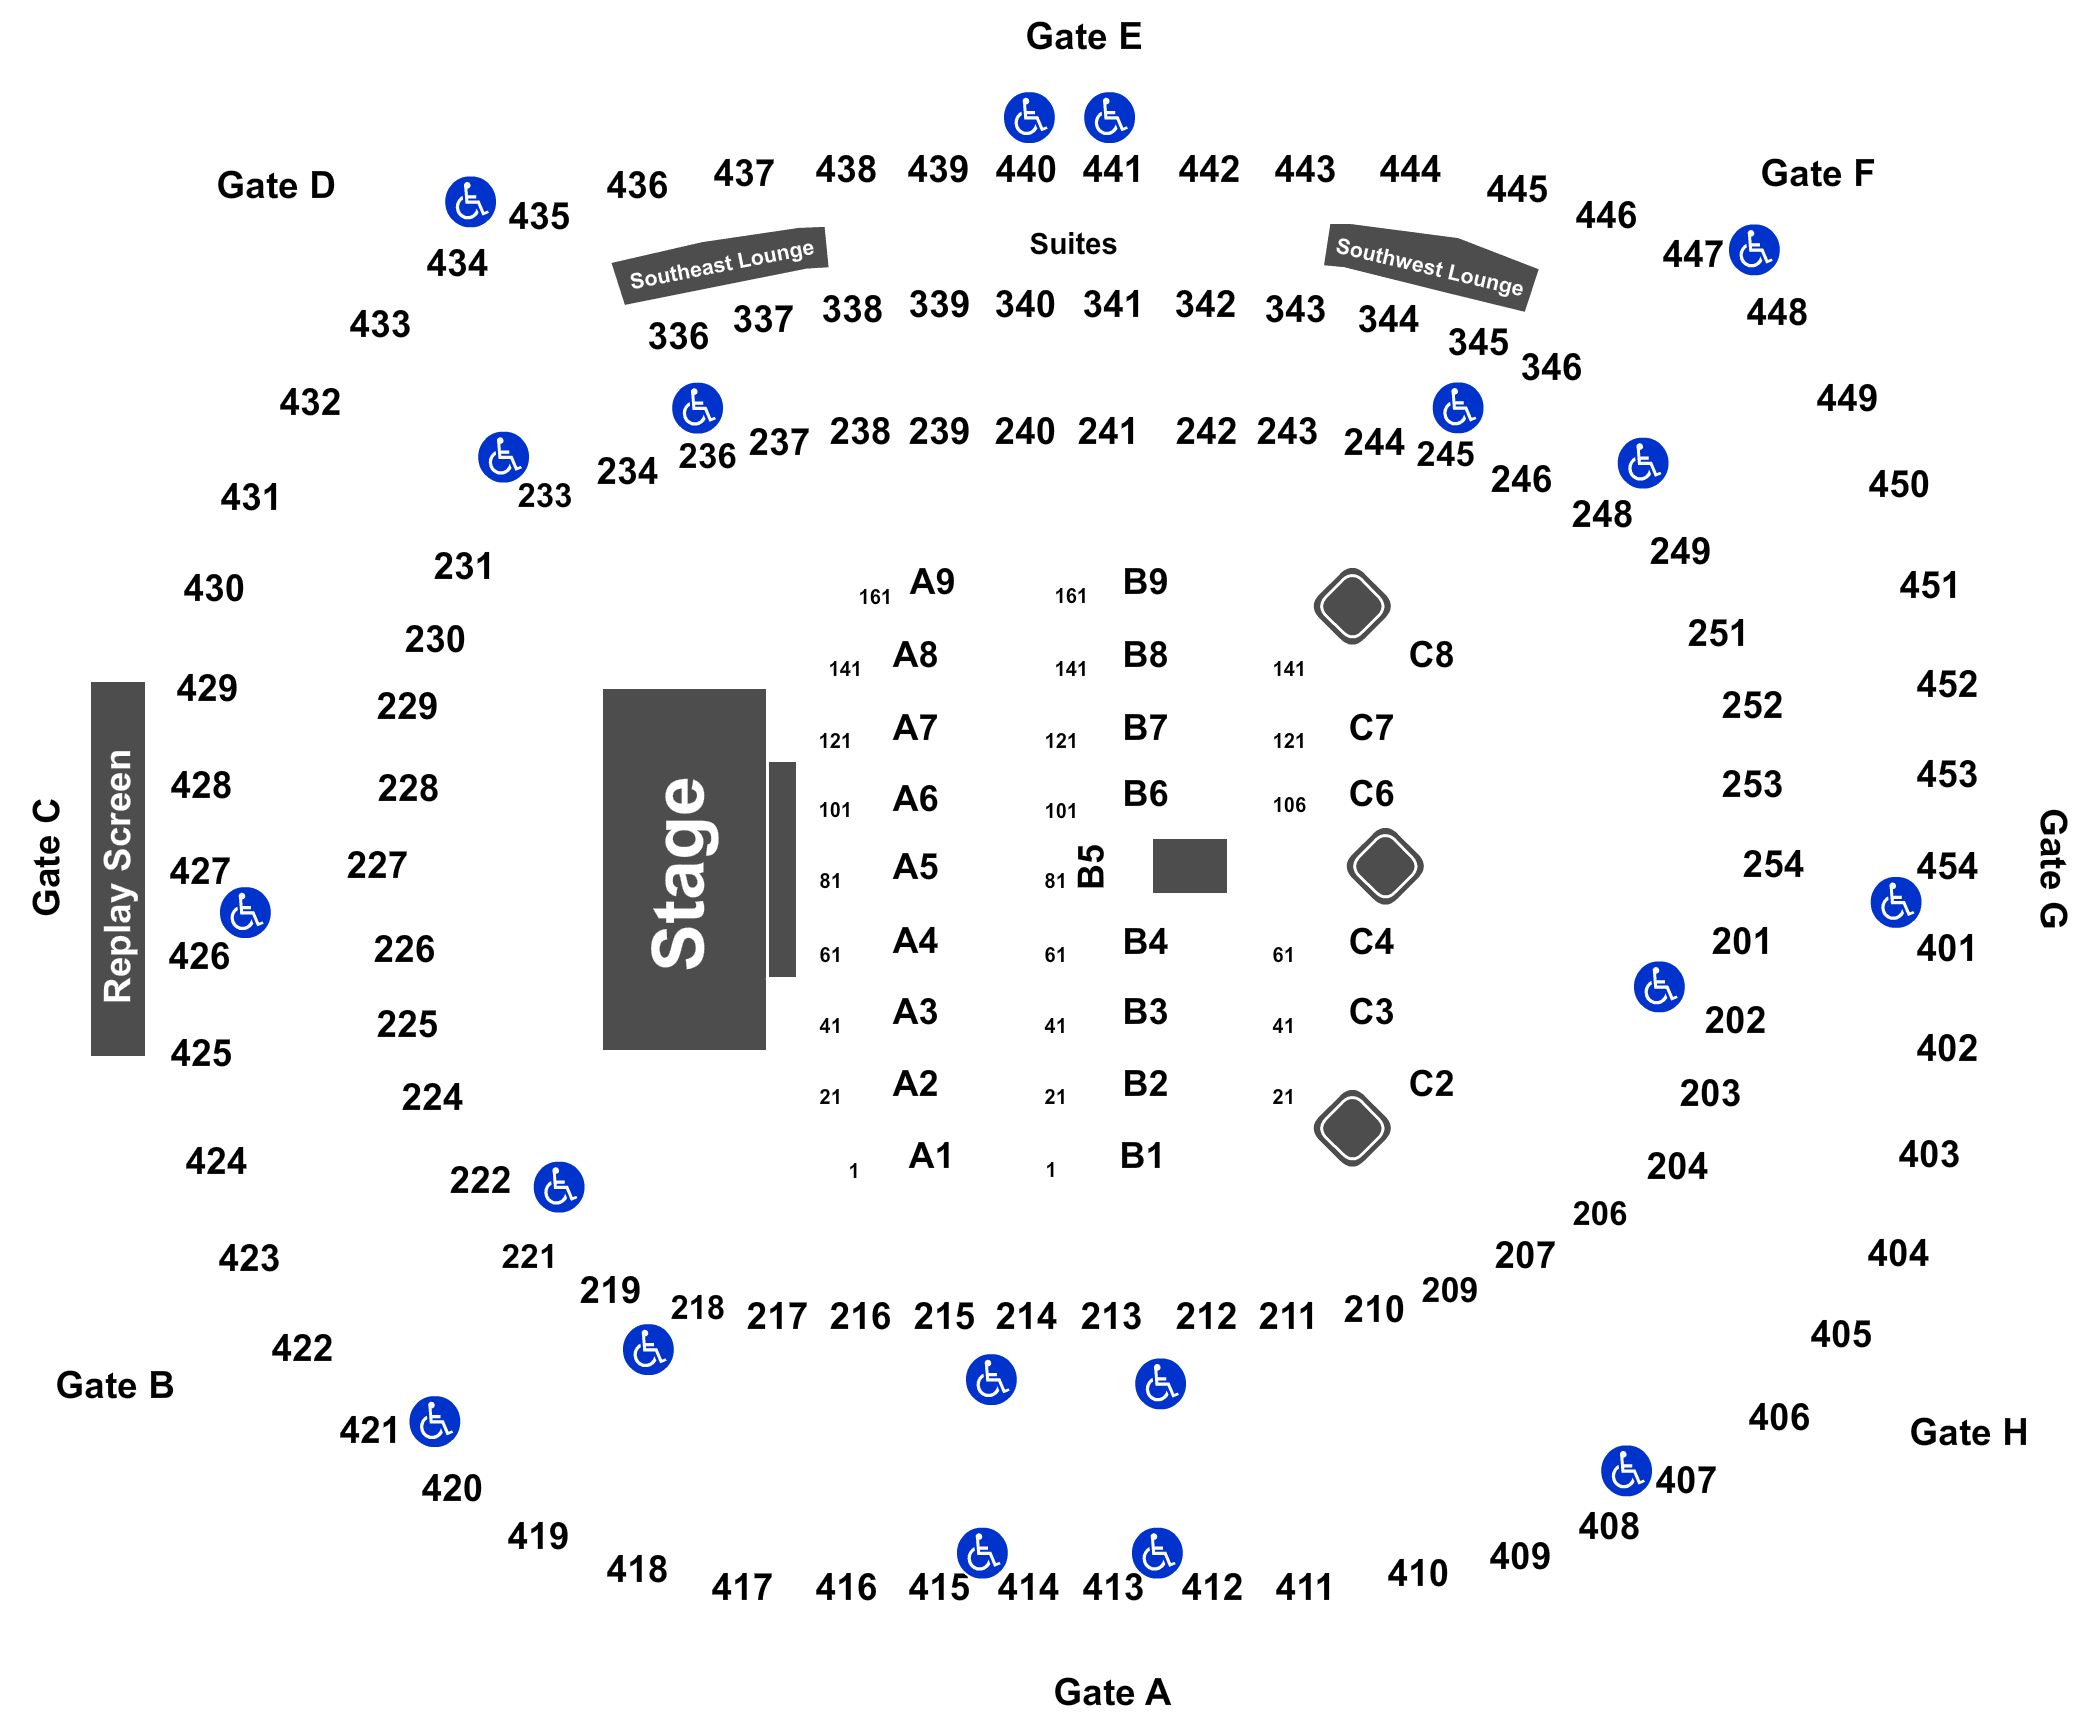 Bc Place Seating Chart Rows